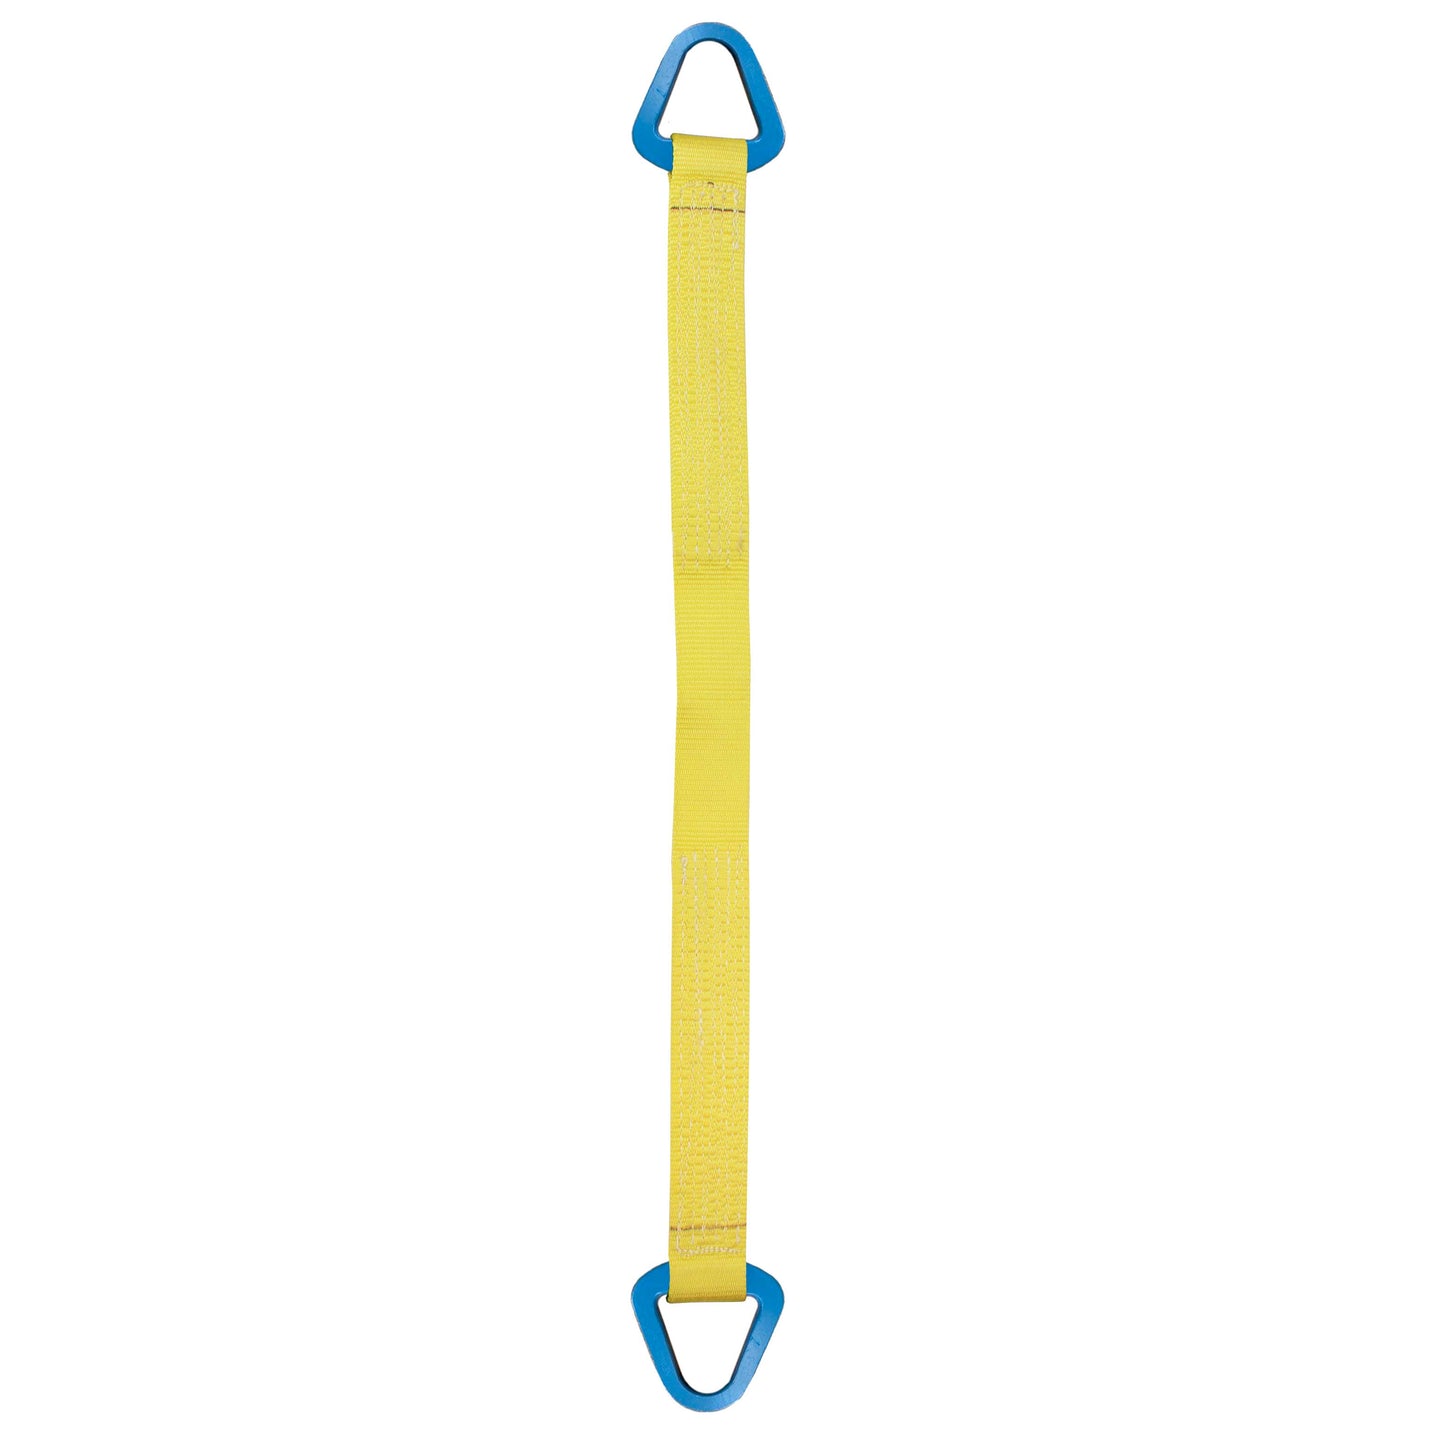 Nylon Lifting Sling Triangle 3 inch x 10 foot 1ply image 1 of 2